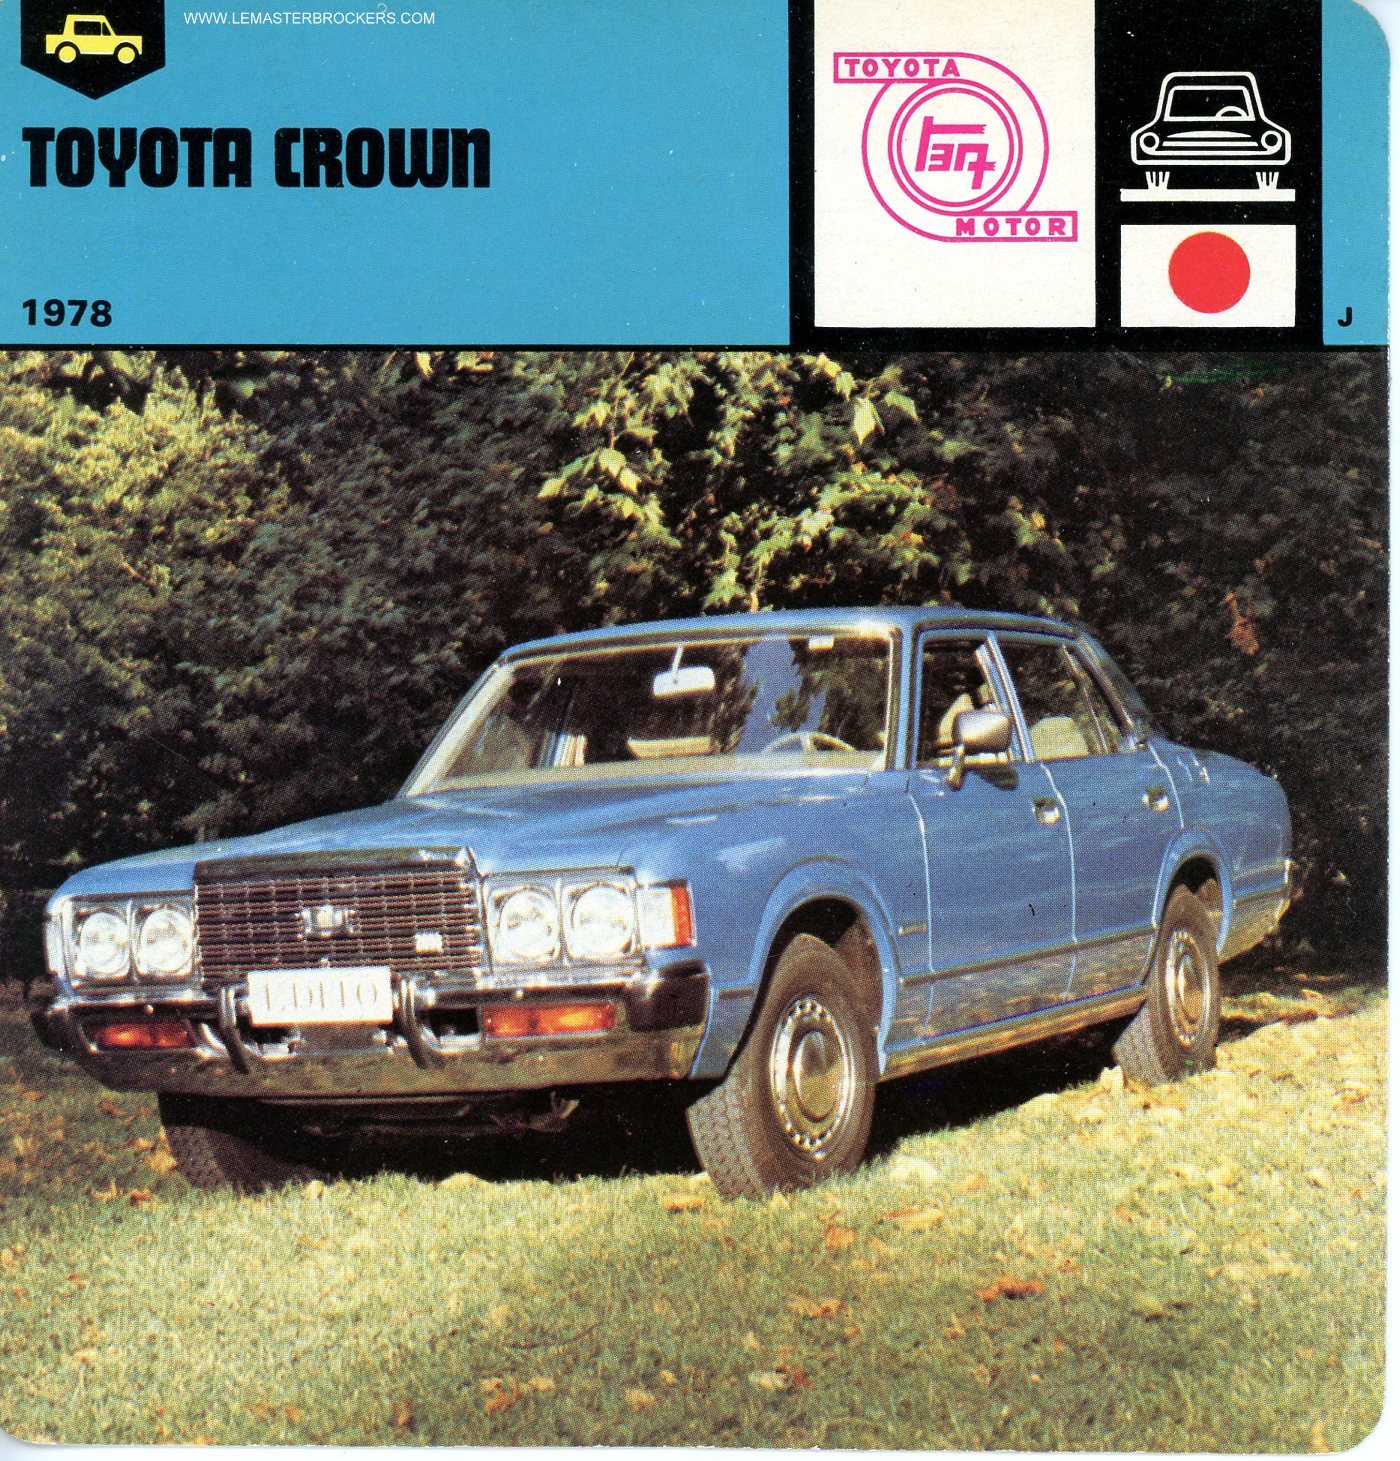 FICHE TOYOTA CROWN-CARS-CARD-LEMASTERBROCKERS